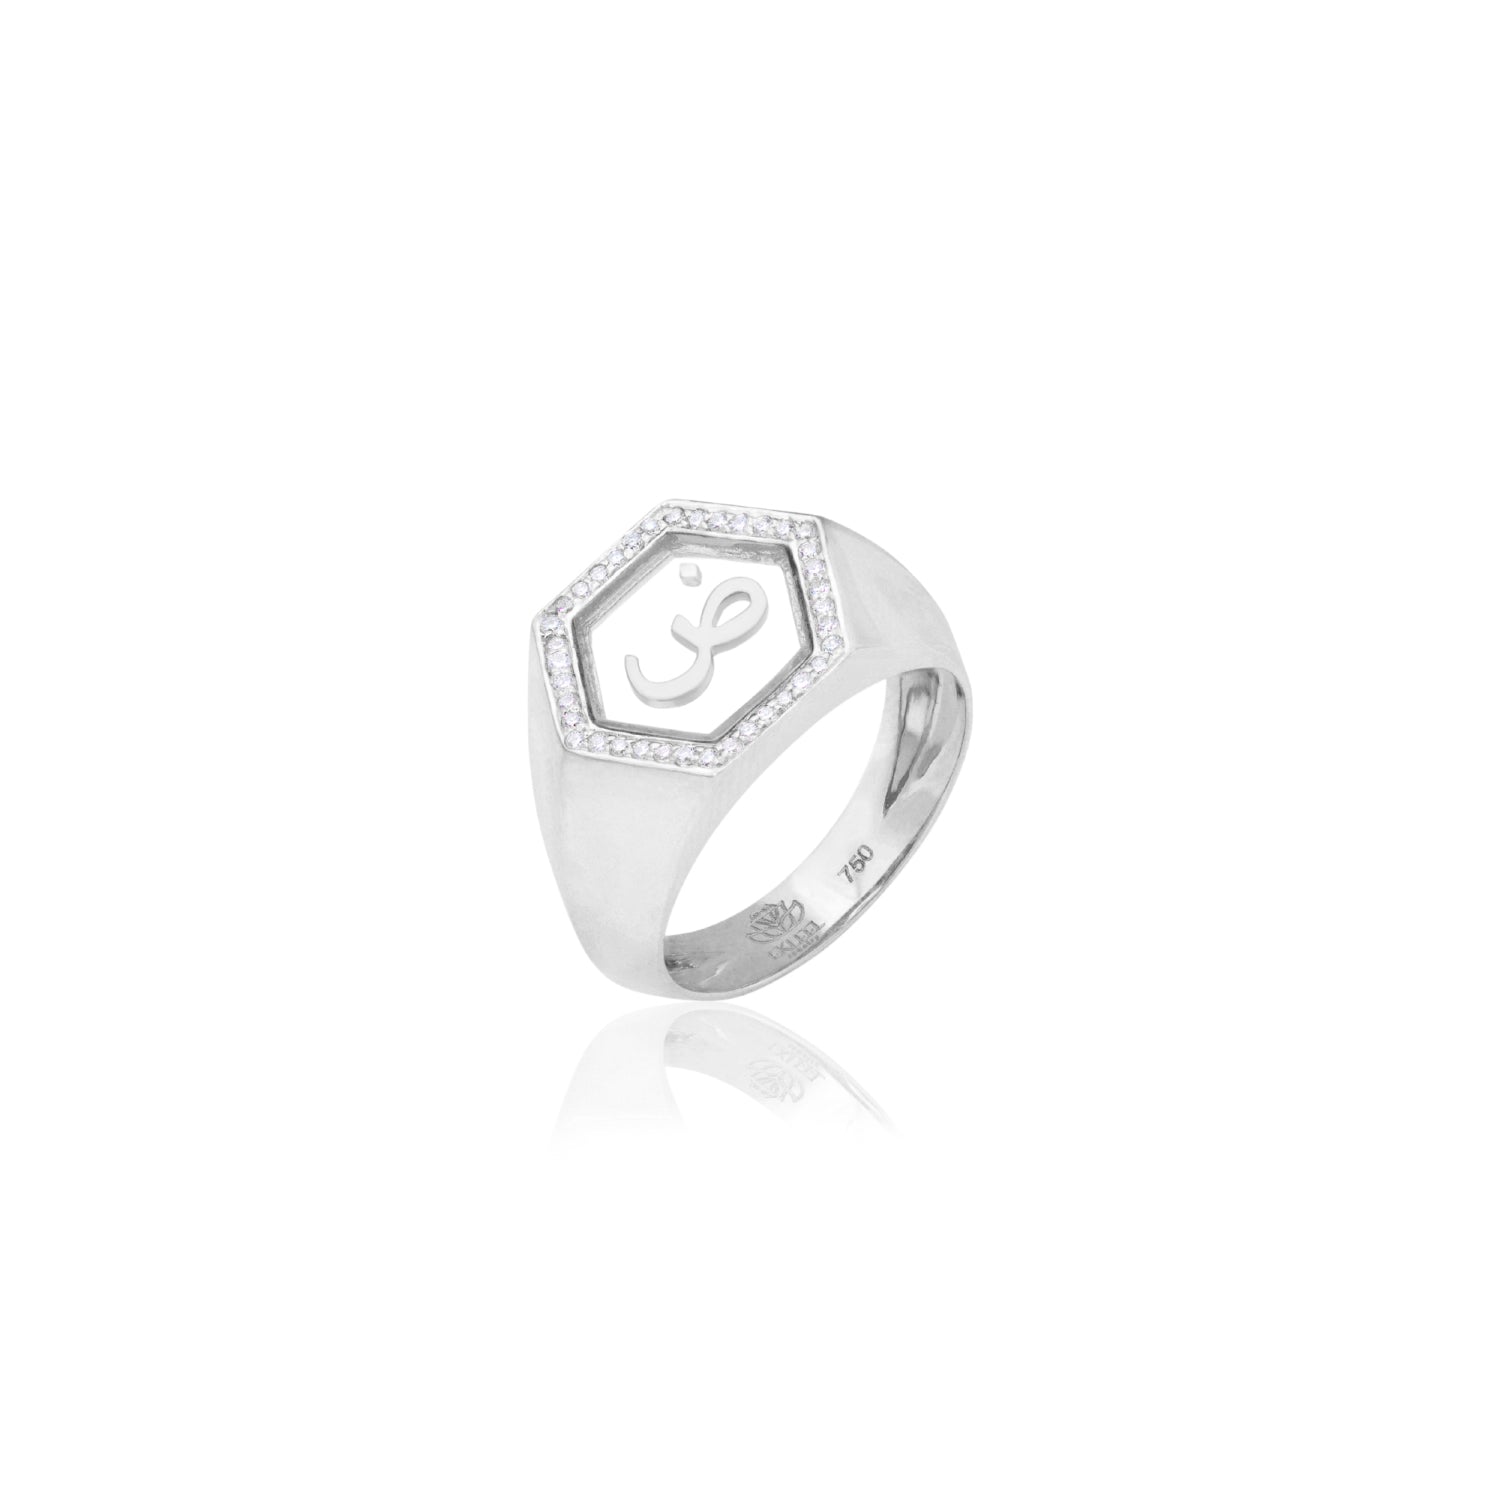 Qamoos 2.0 Letter ض Plexiglass and Diamond Signet Ring in White Gold